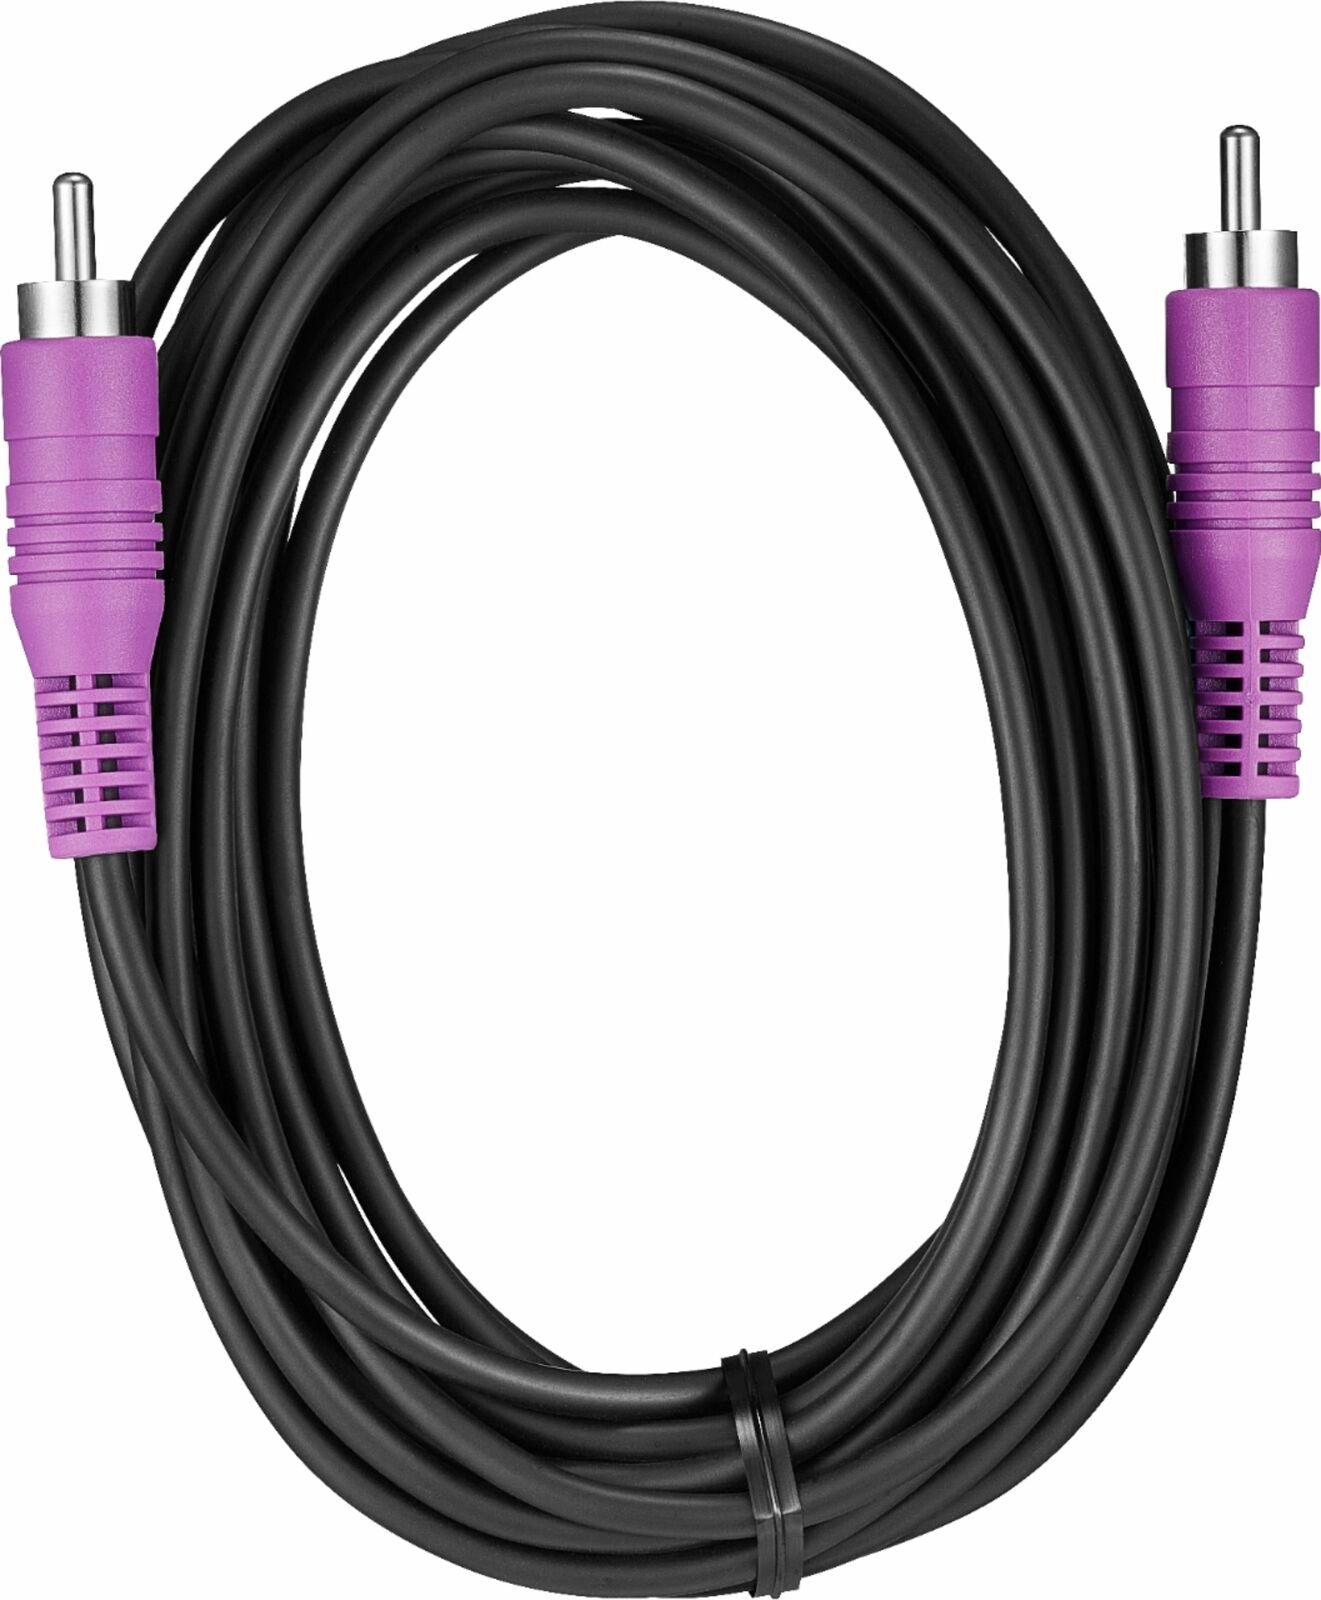 Insignia - 15' Subwoofer Cable - Rekes Sales